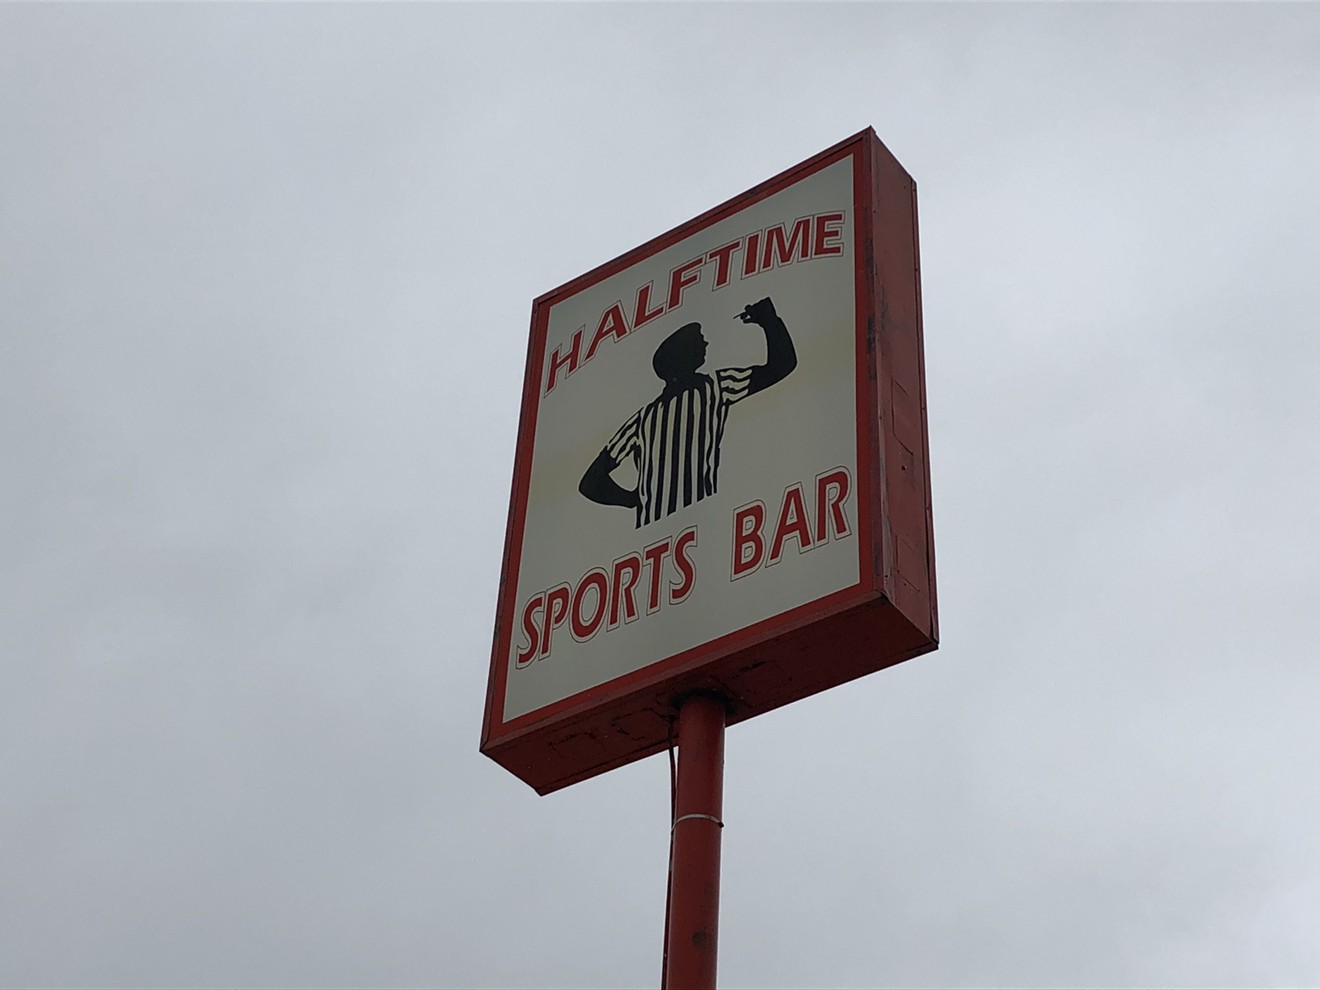 The sign for Halftime Sports Bar is like a beacon on Quebec Street in Commerce City.